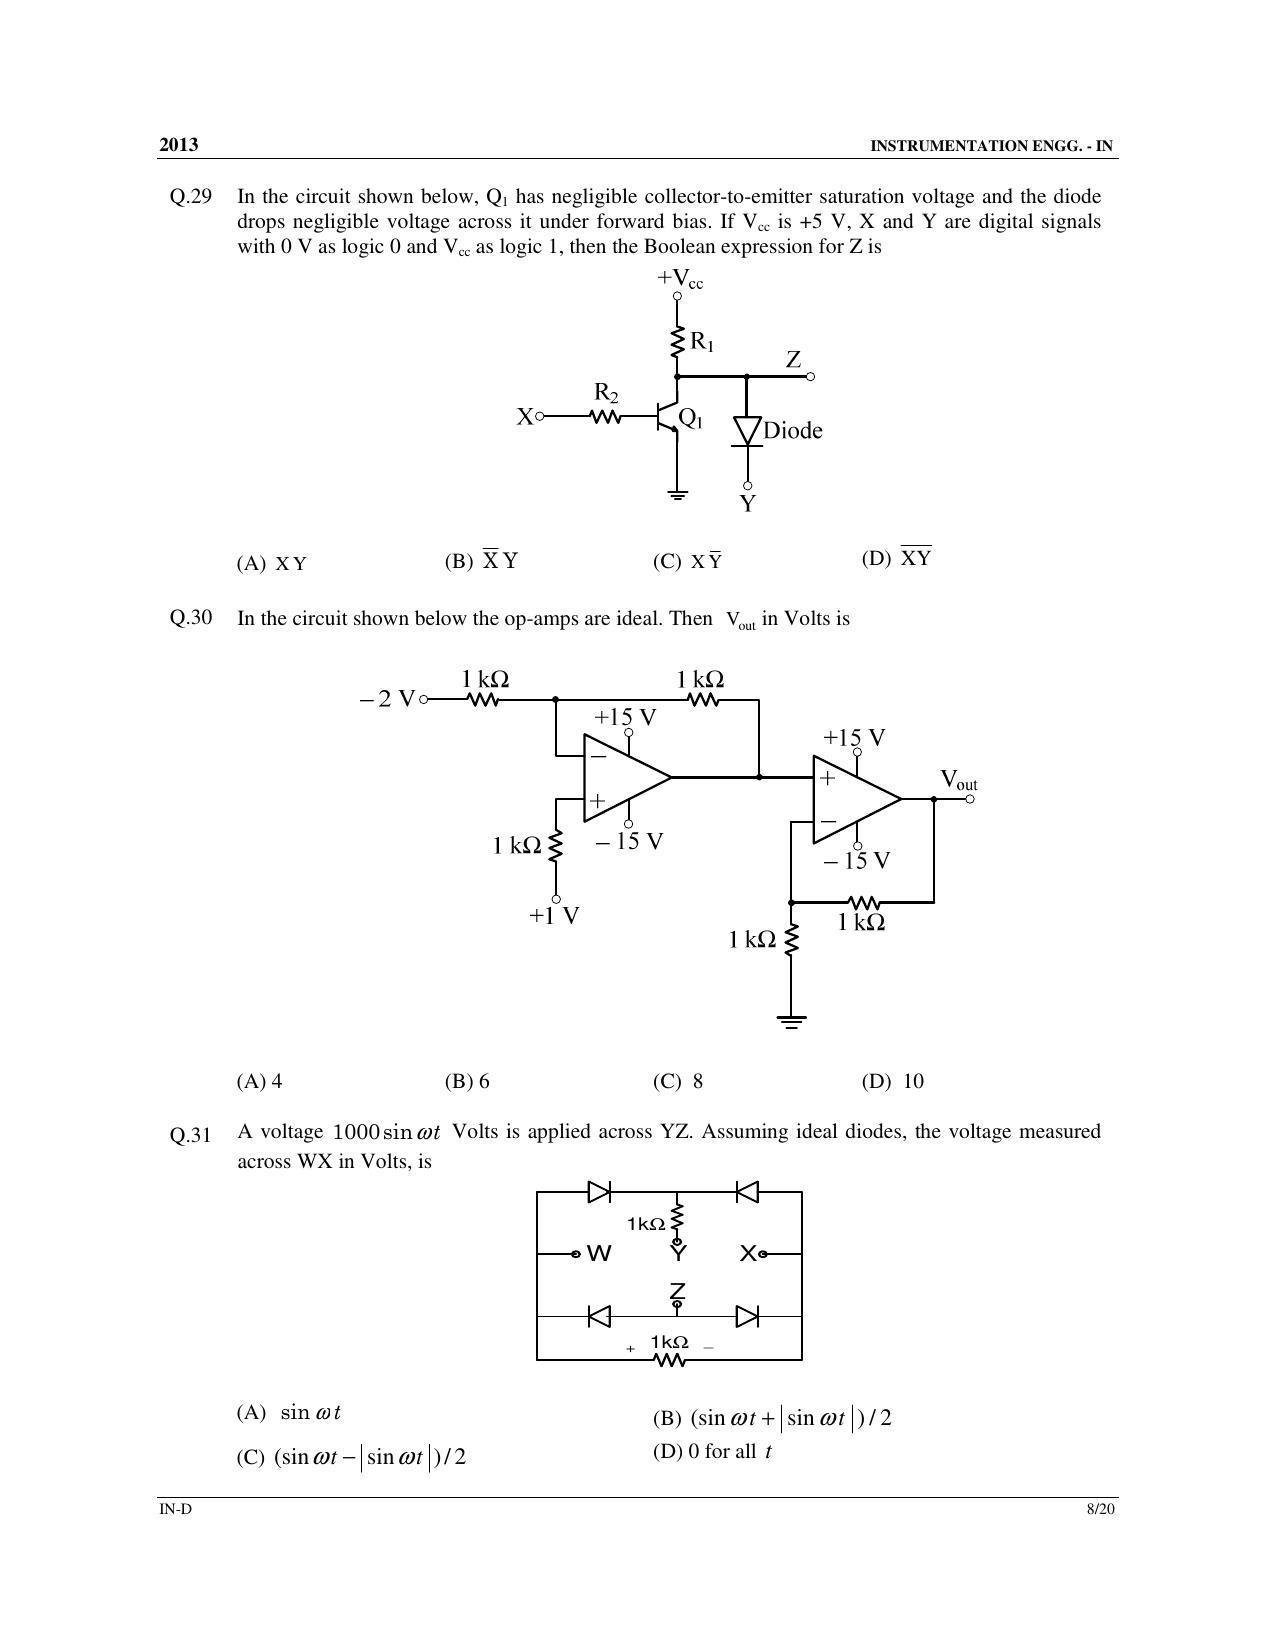 GATE 2013 Instrumentation Engineering (IN) Question Paper with Answer Key - Page 60